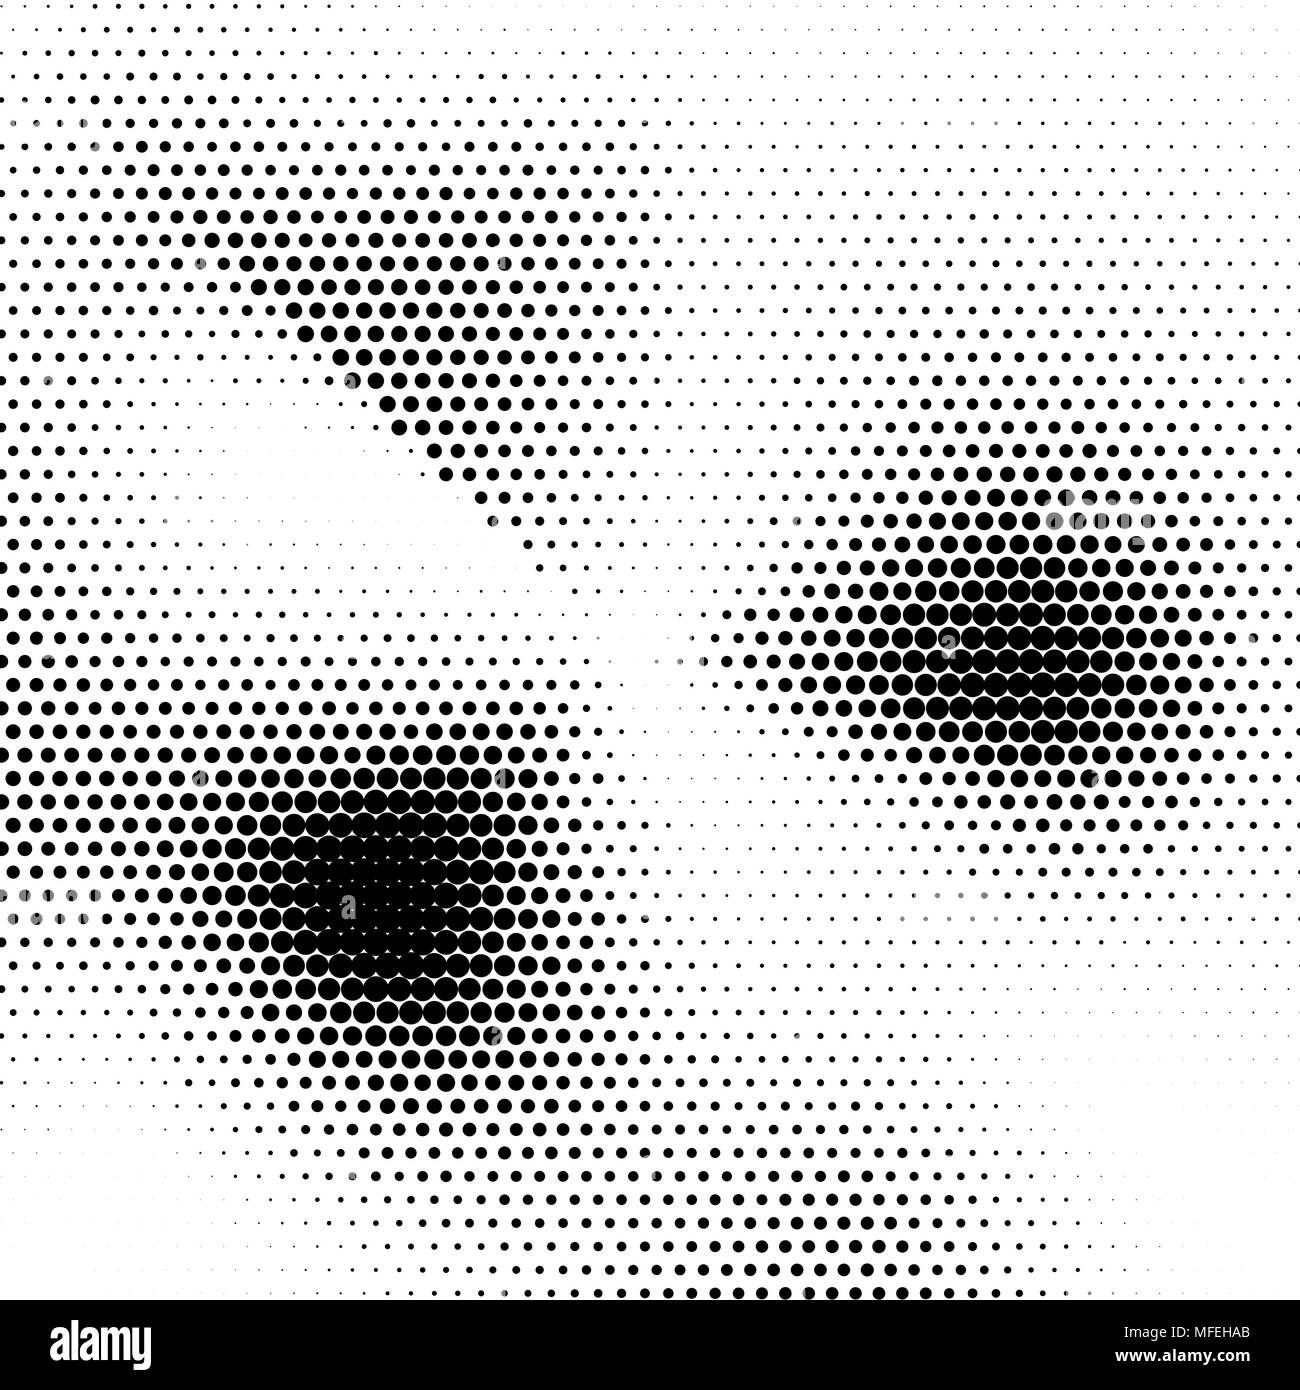 Abstract Halftone Texture. Vector black and white background Stock Vector